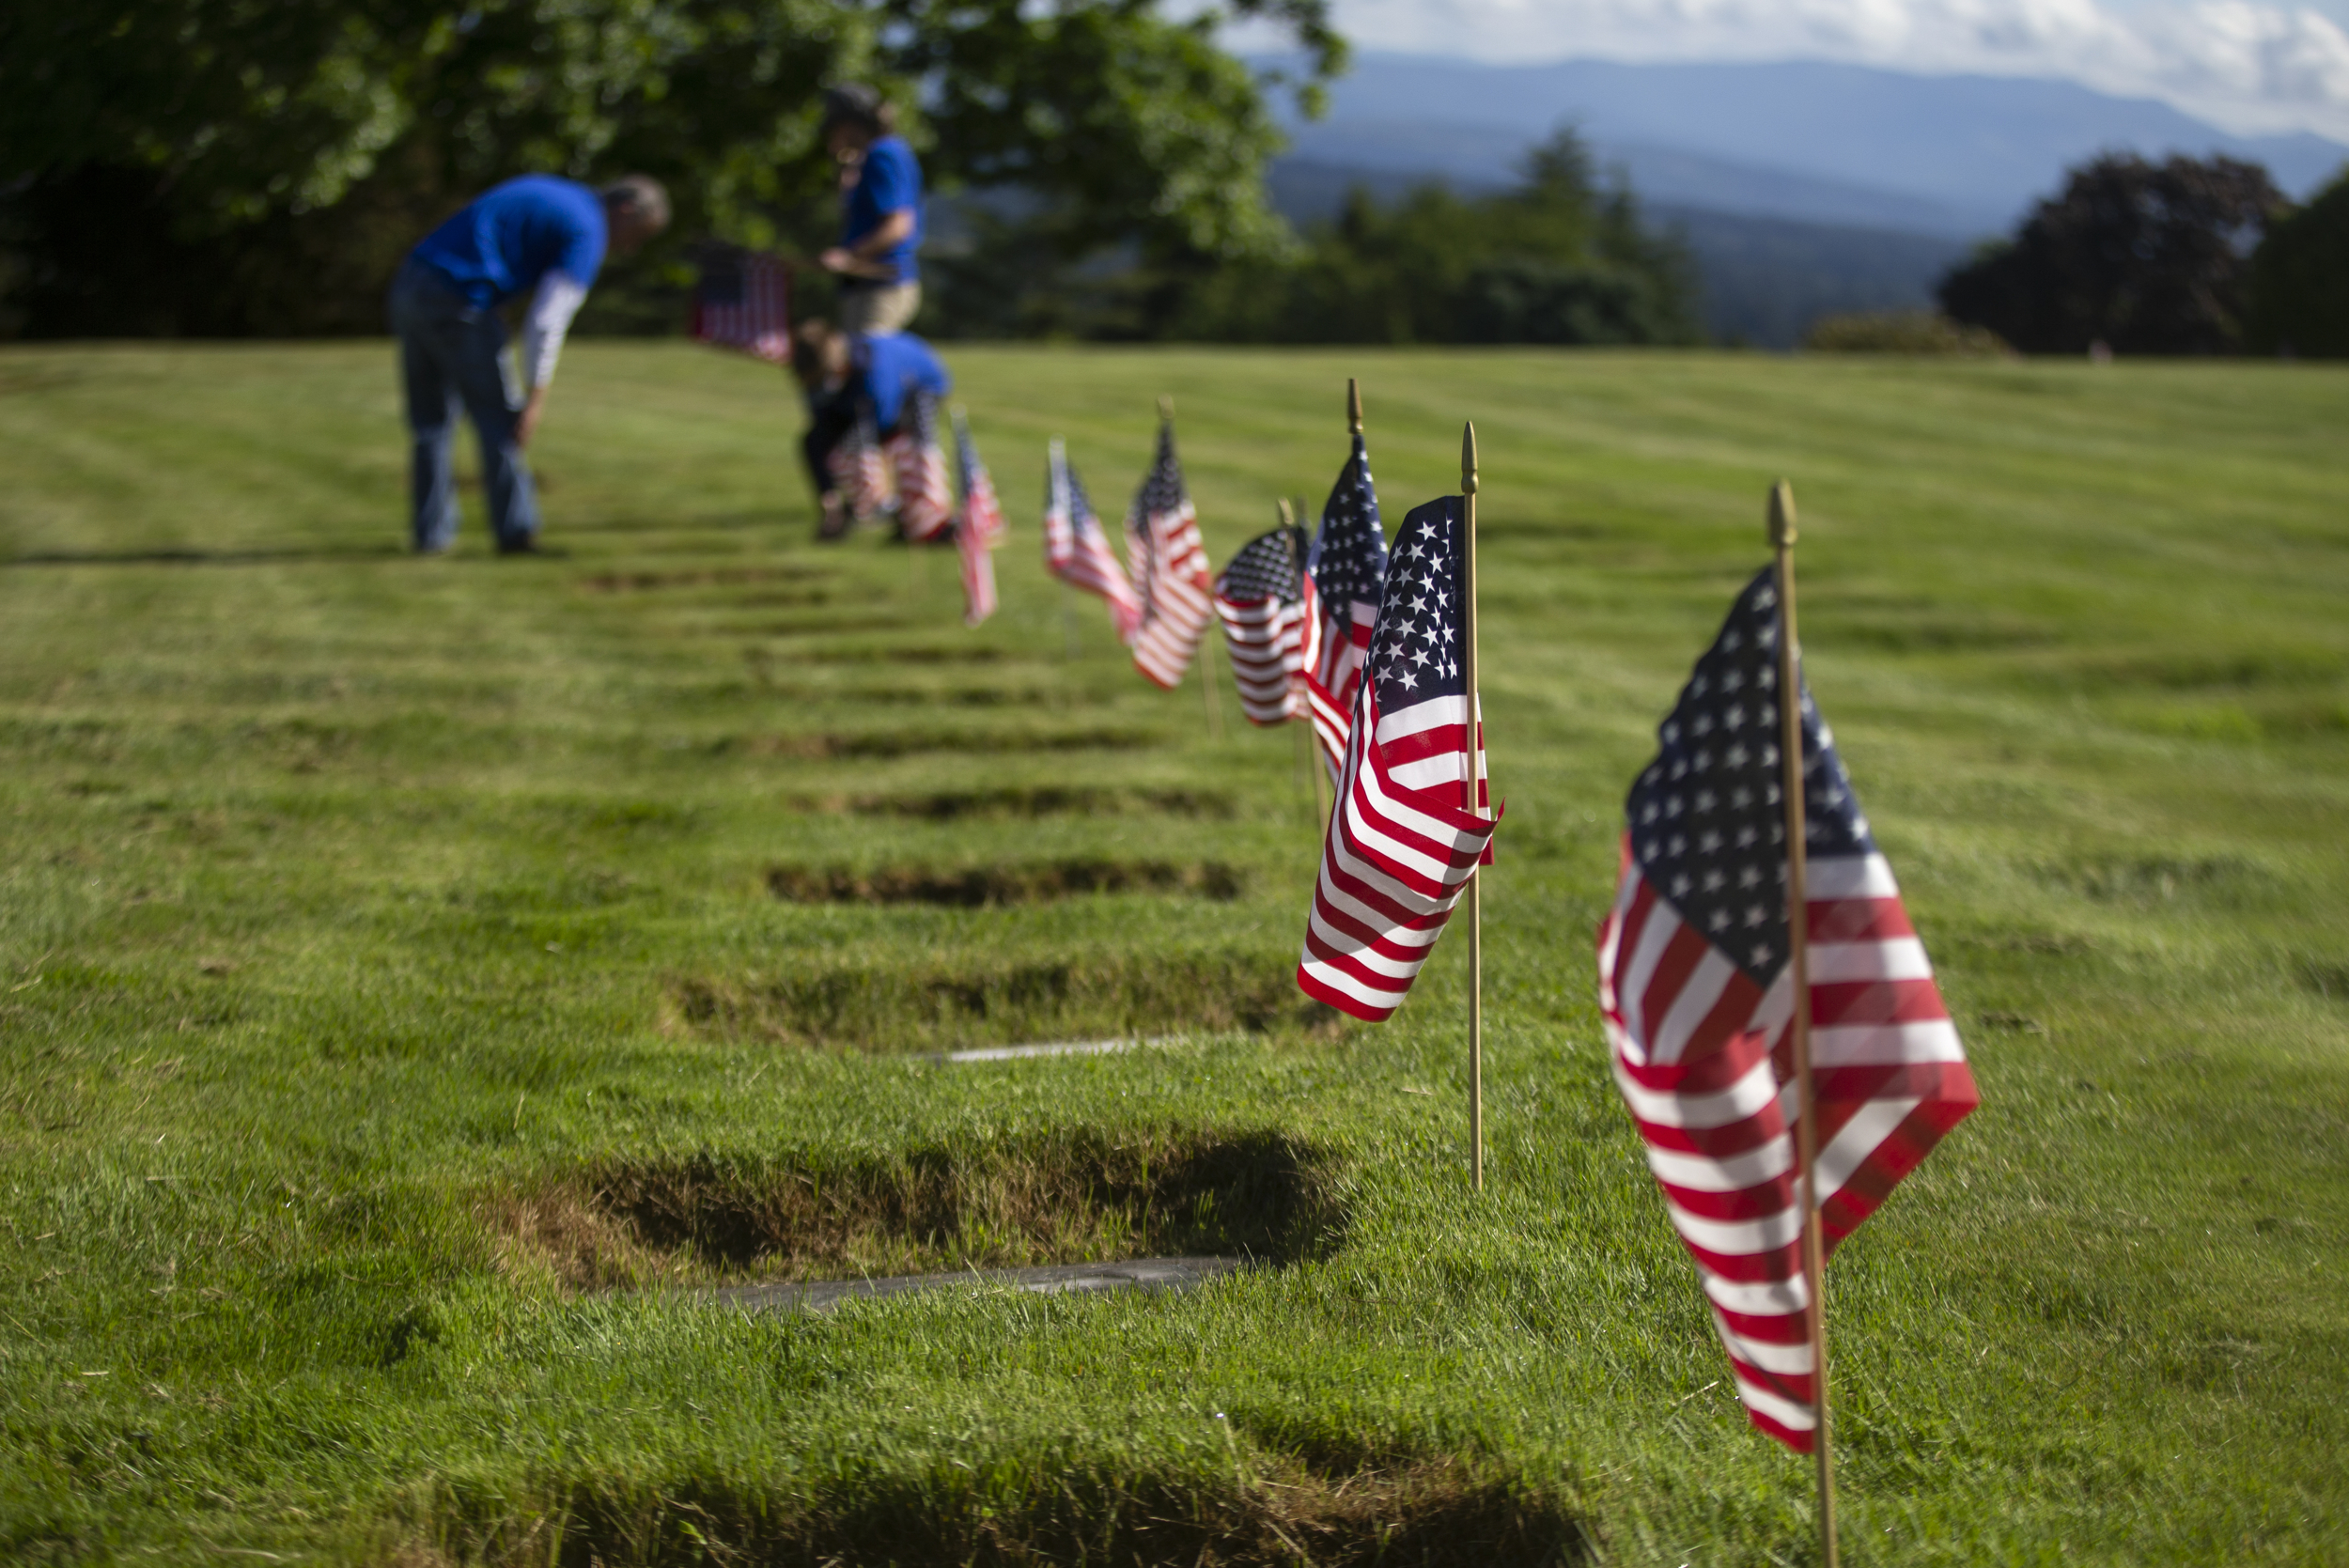 Local volunteers place flags on veterans' graves in honor of Memorial Day, News